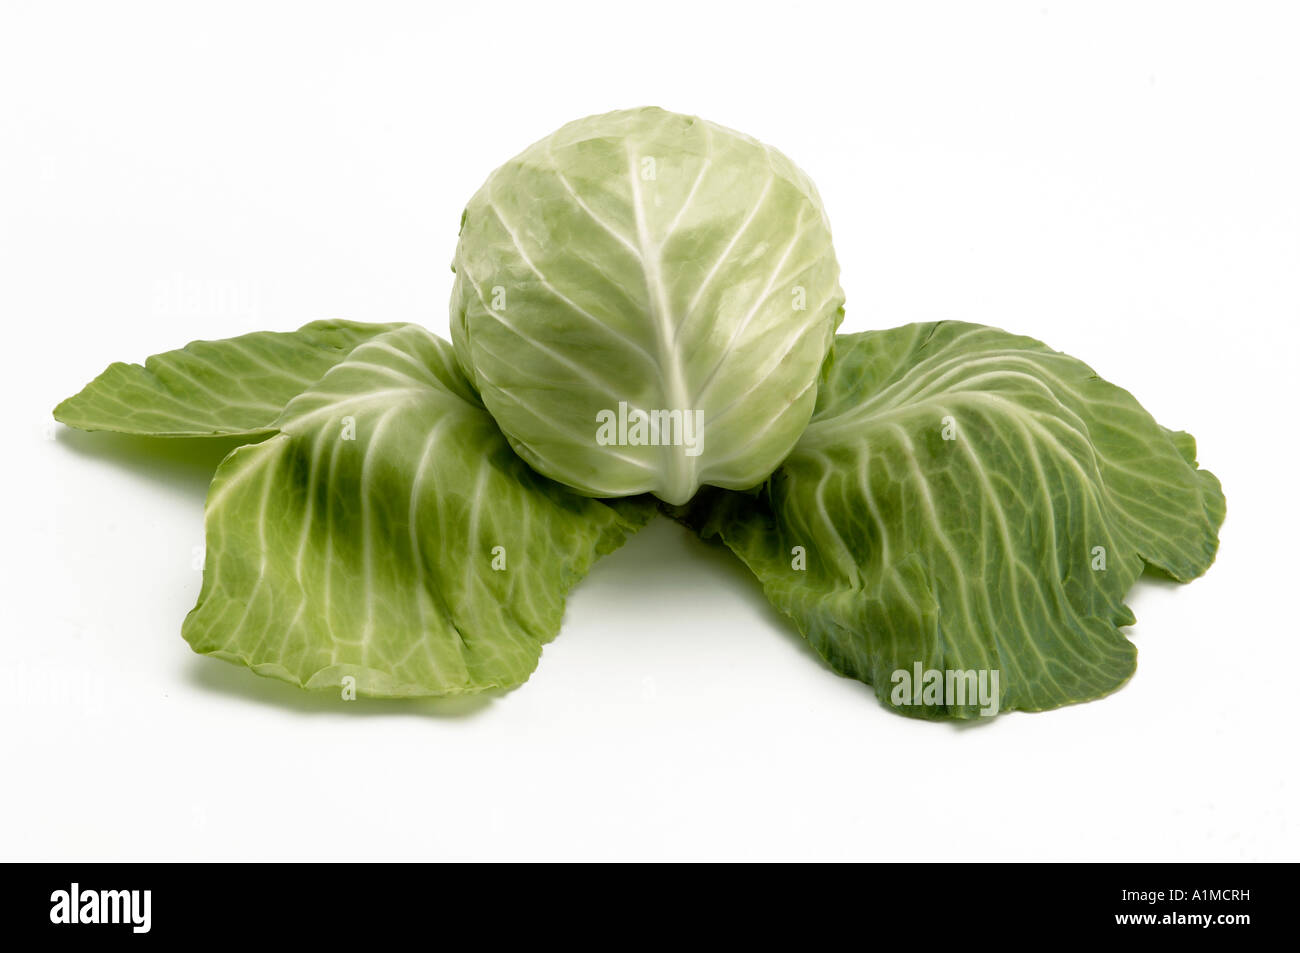 HMA210092 Vegetable one Cabbage with white background Stock Photo